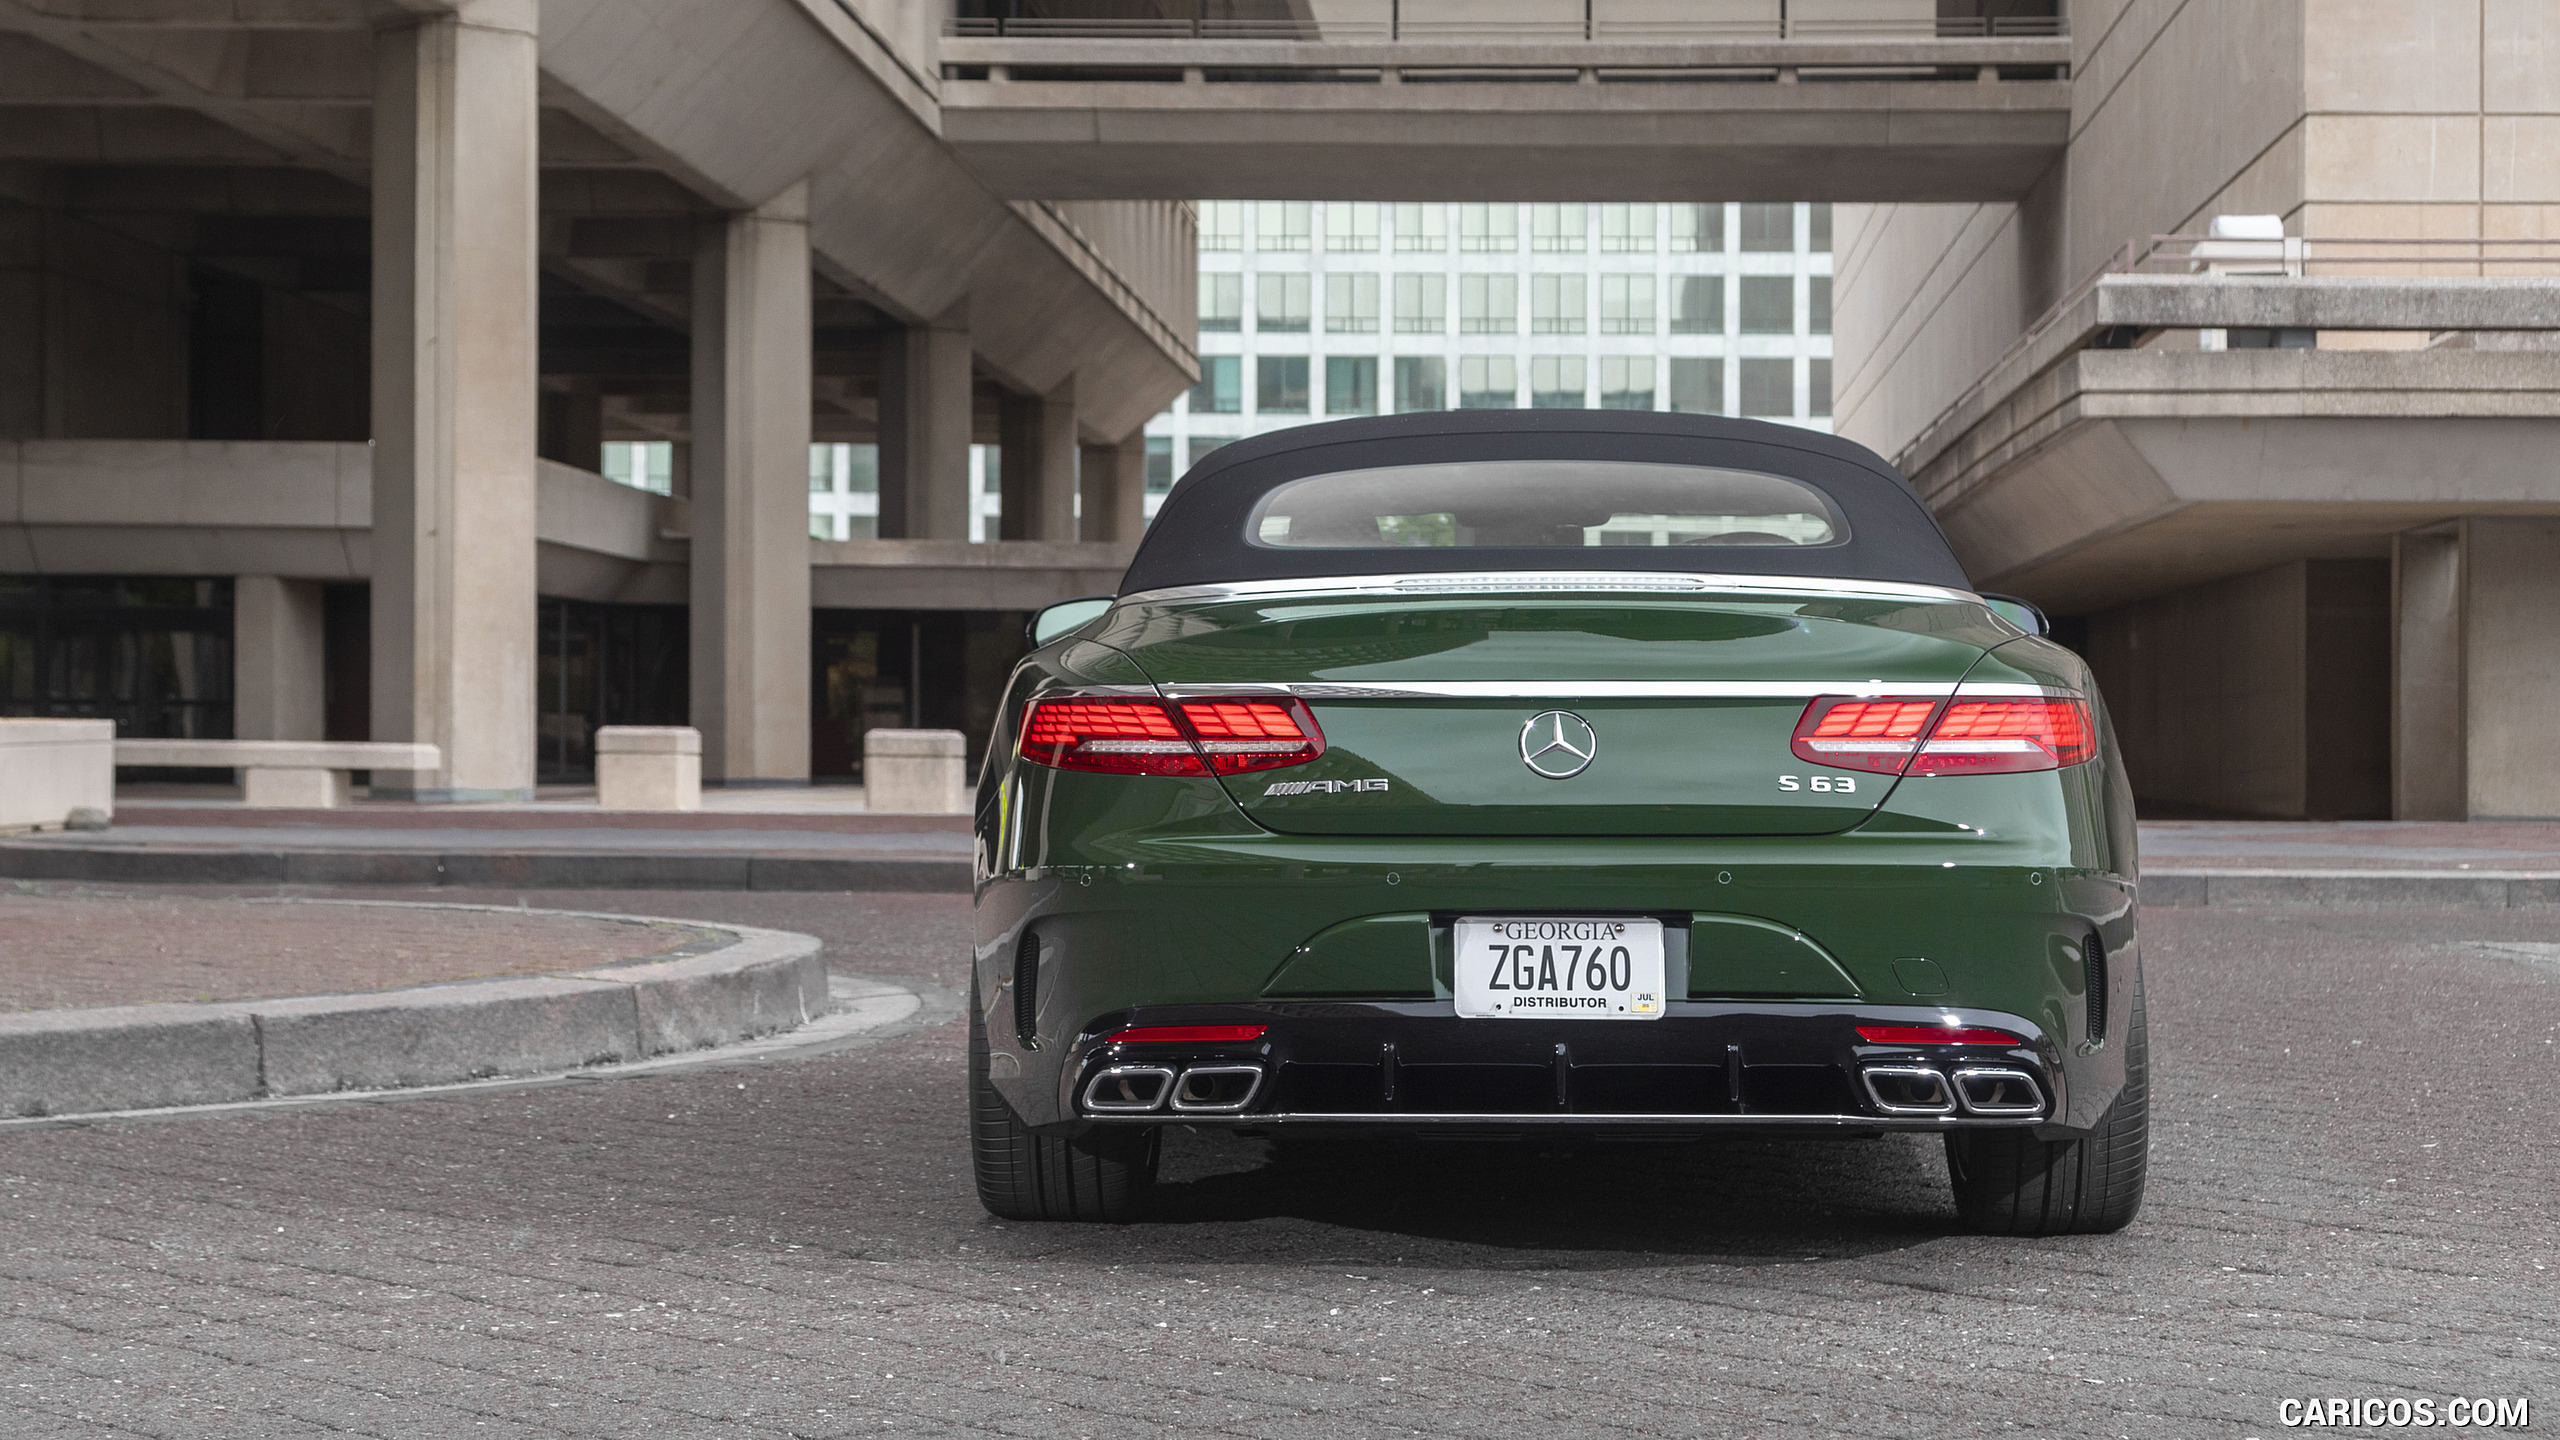 2020 Mercedes-AMG S 63 Cabriolet (US-Spec) - Rear, #20 of 47